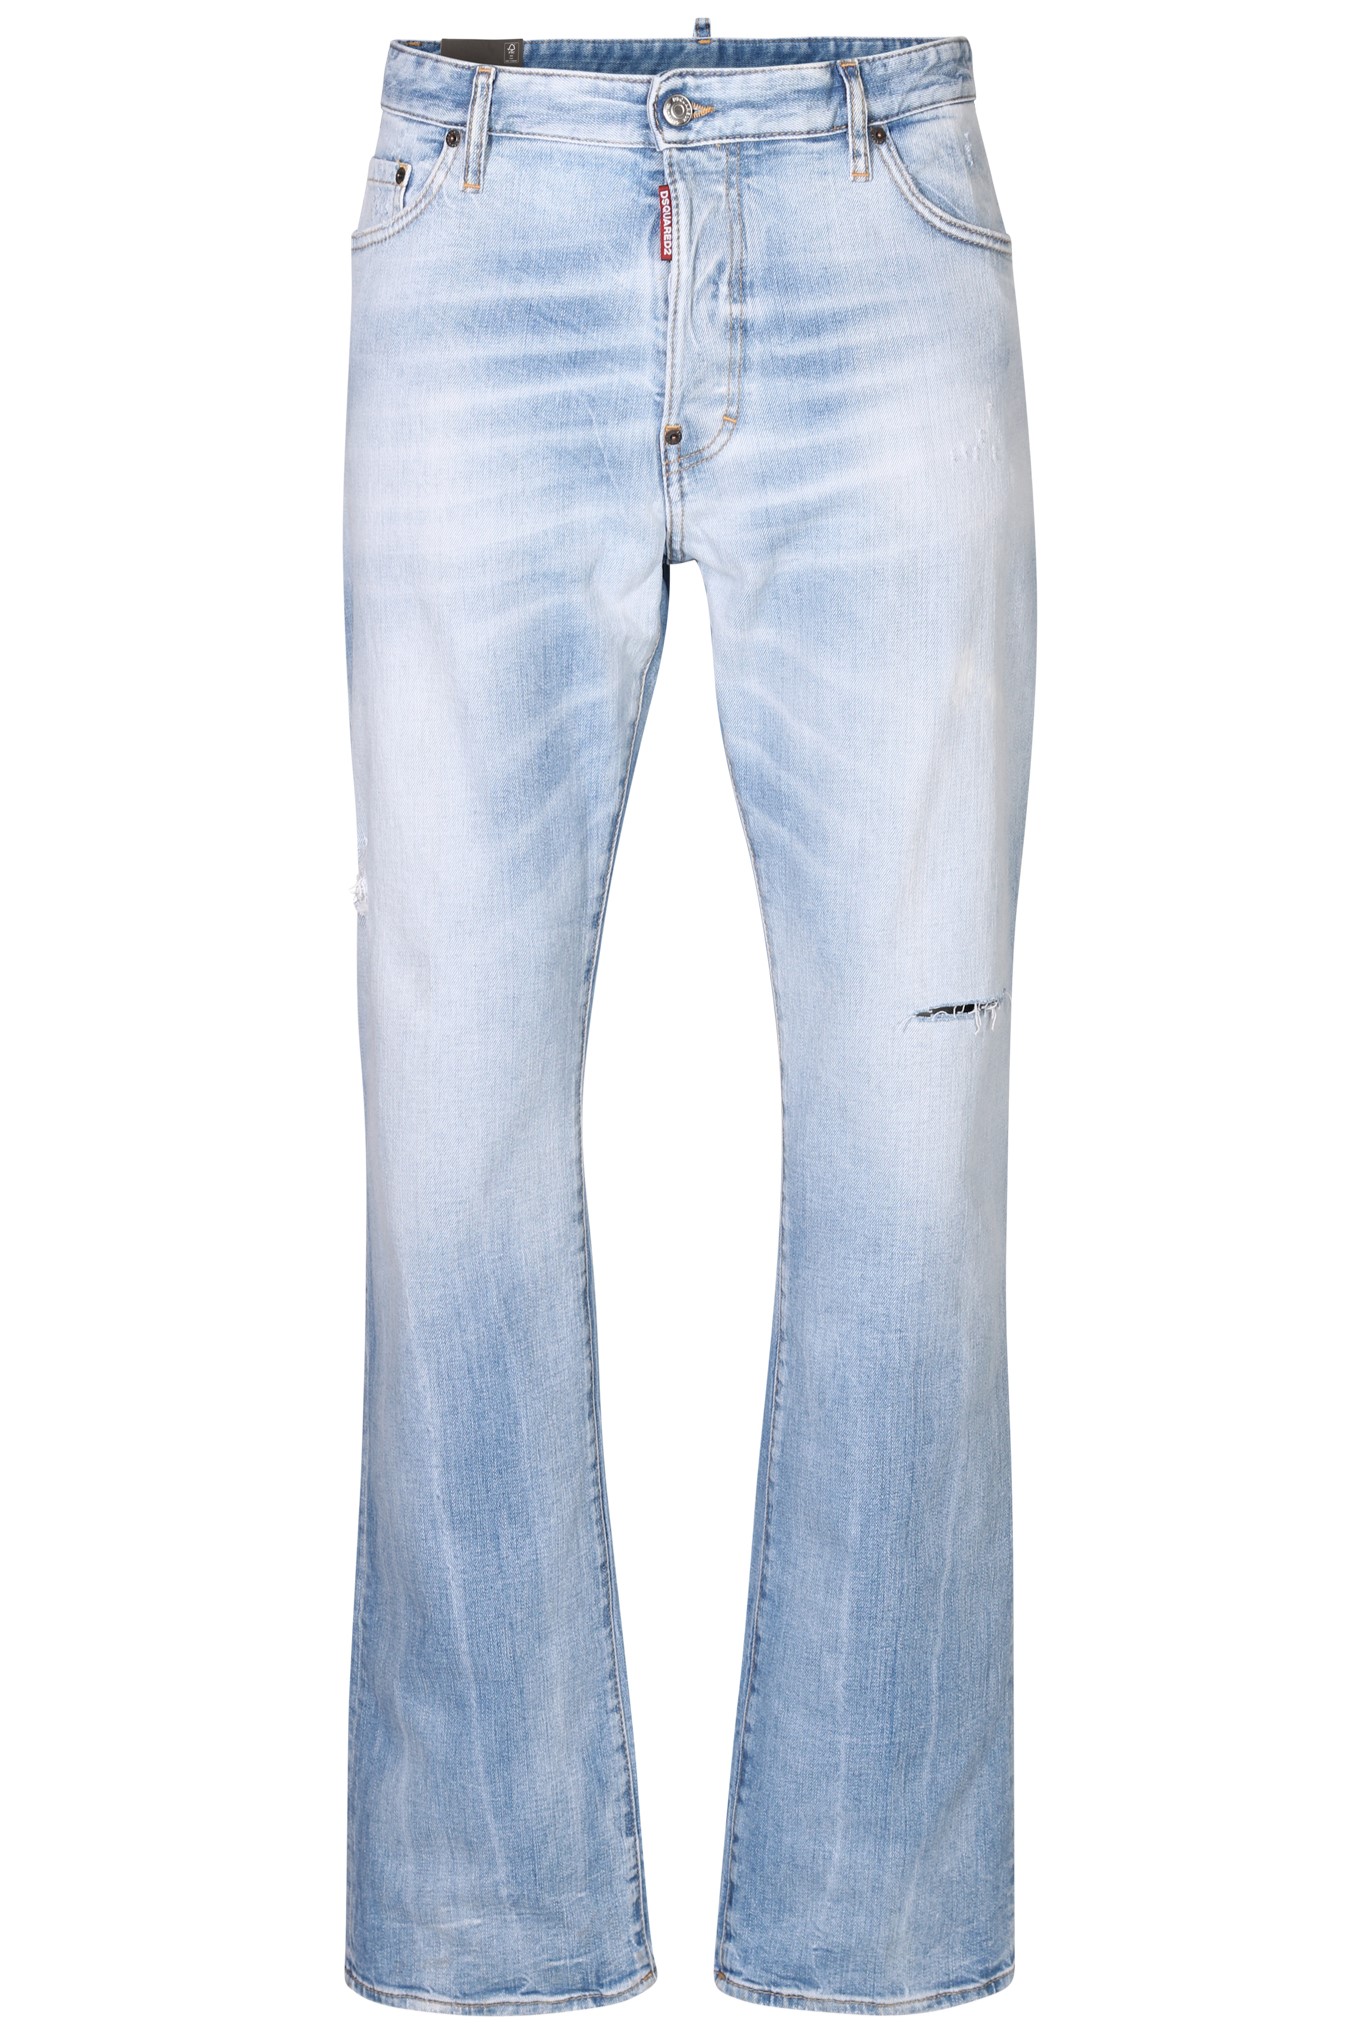 DSQUARED2 Roadie Jeans in Washed Light Blue